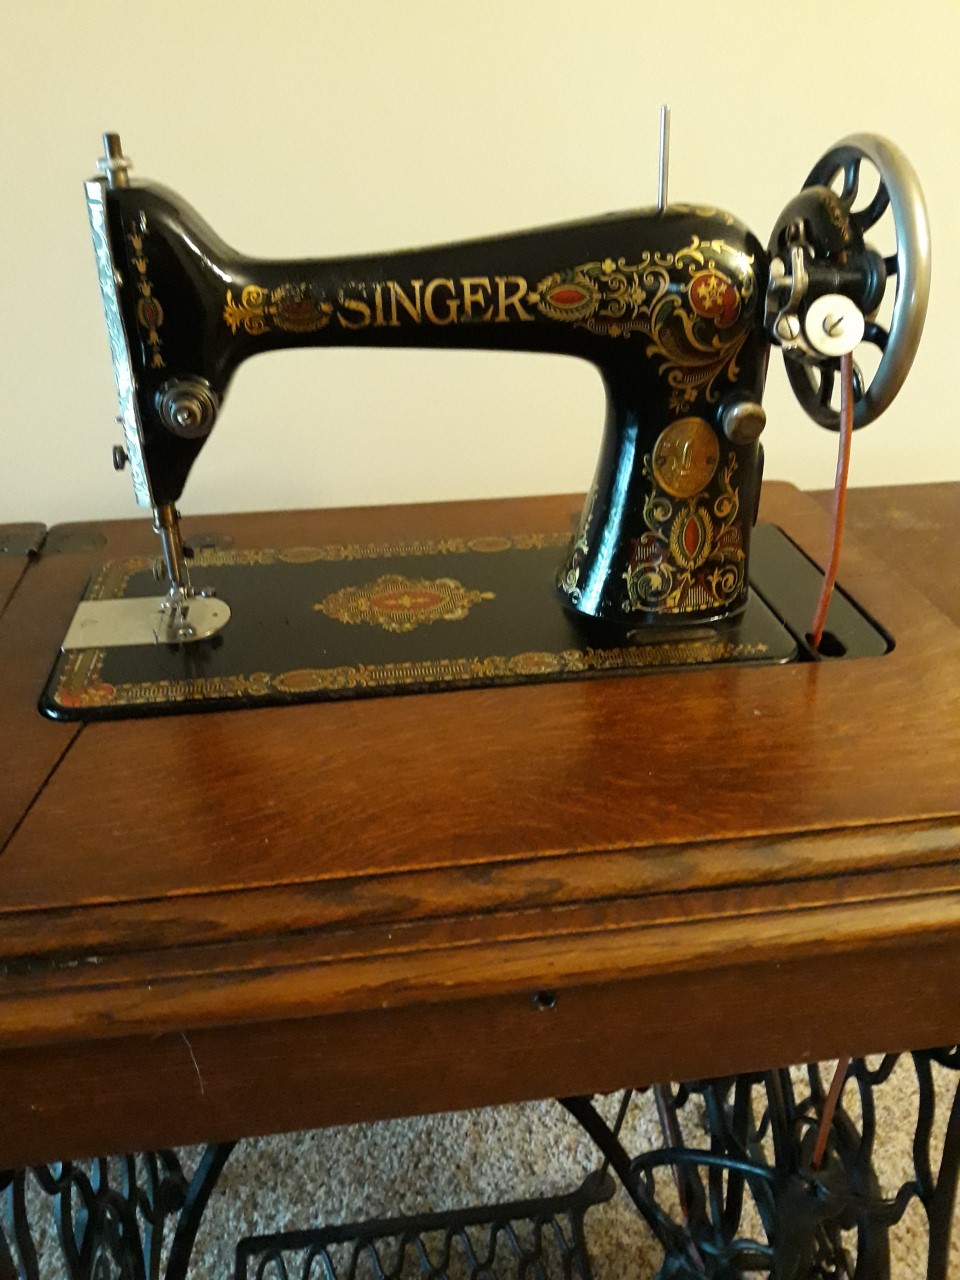 An Antique Manual Singer Treadle Sewing Machine Stock Photo